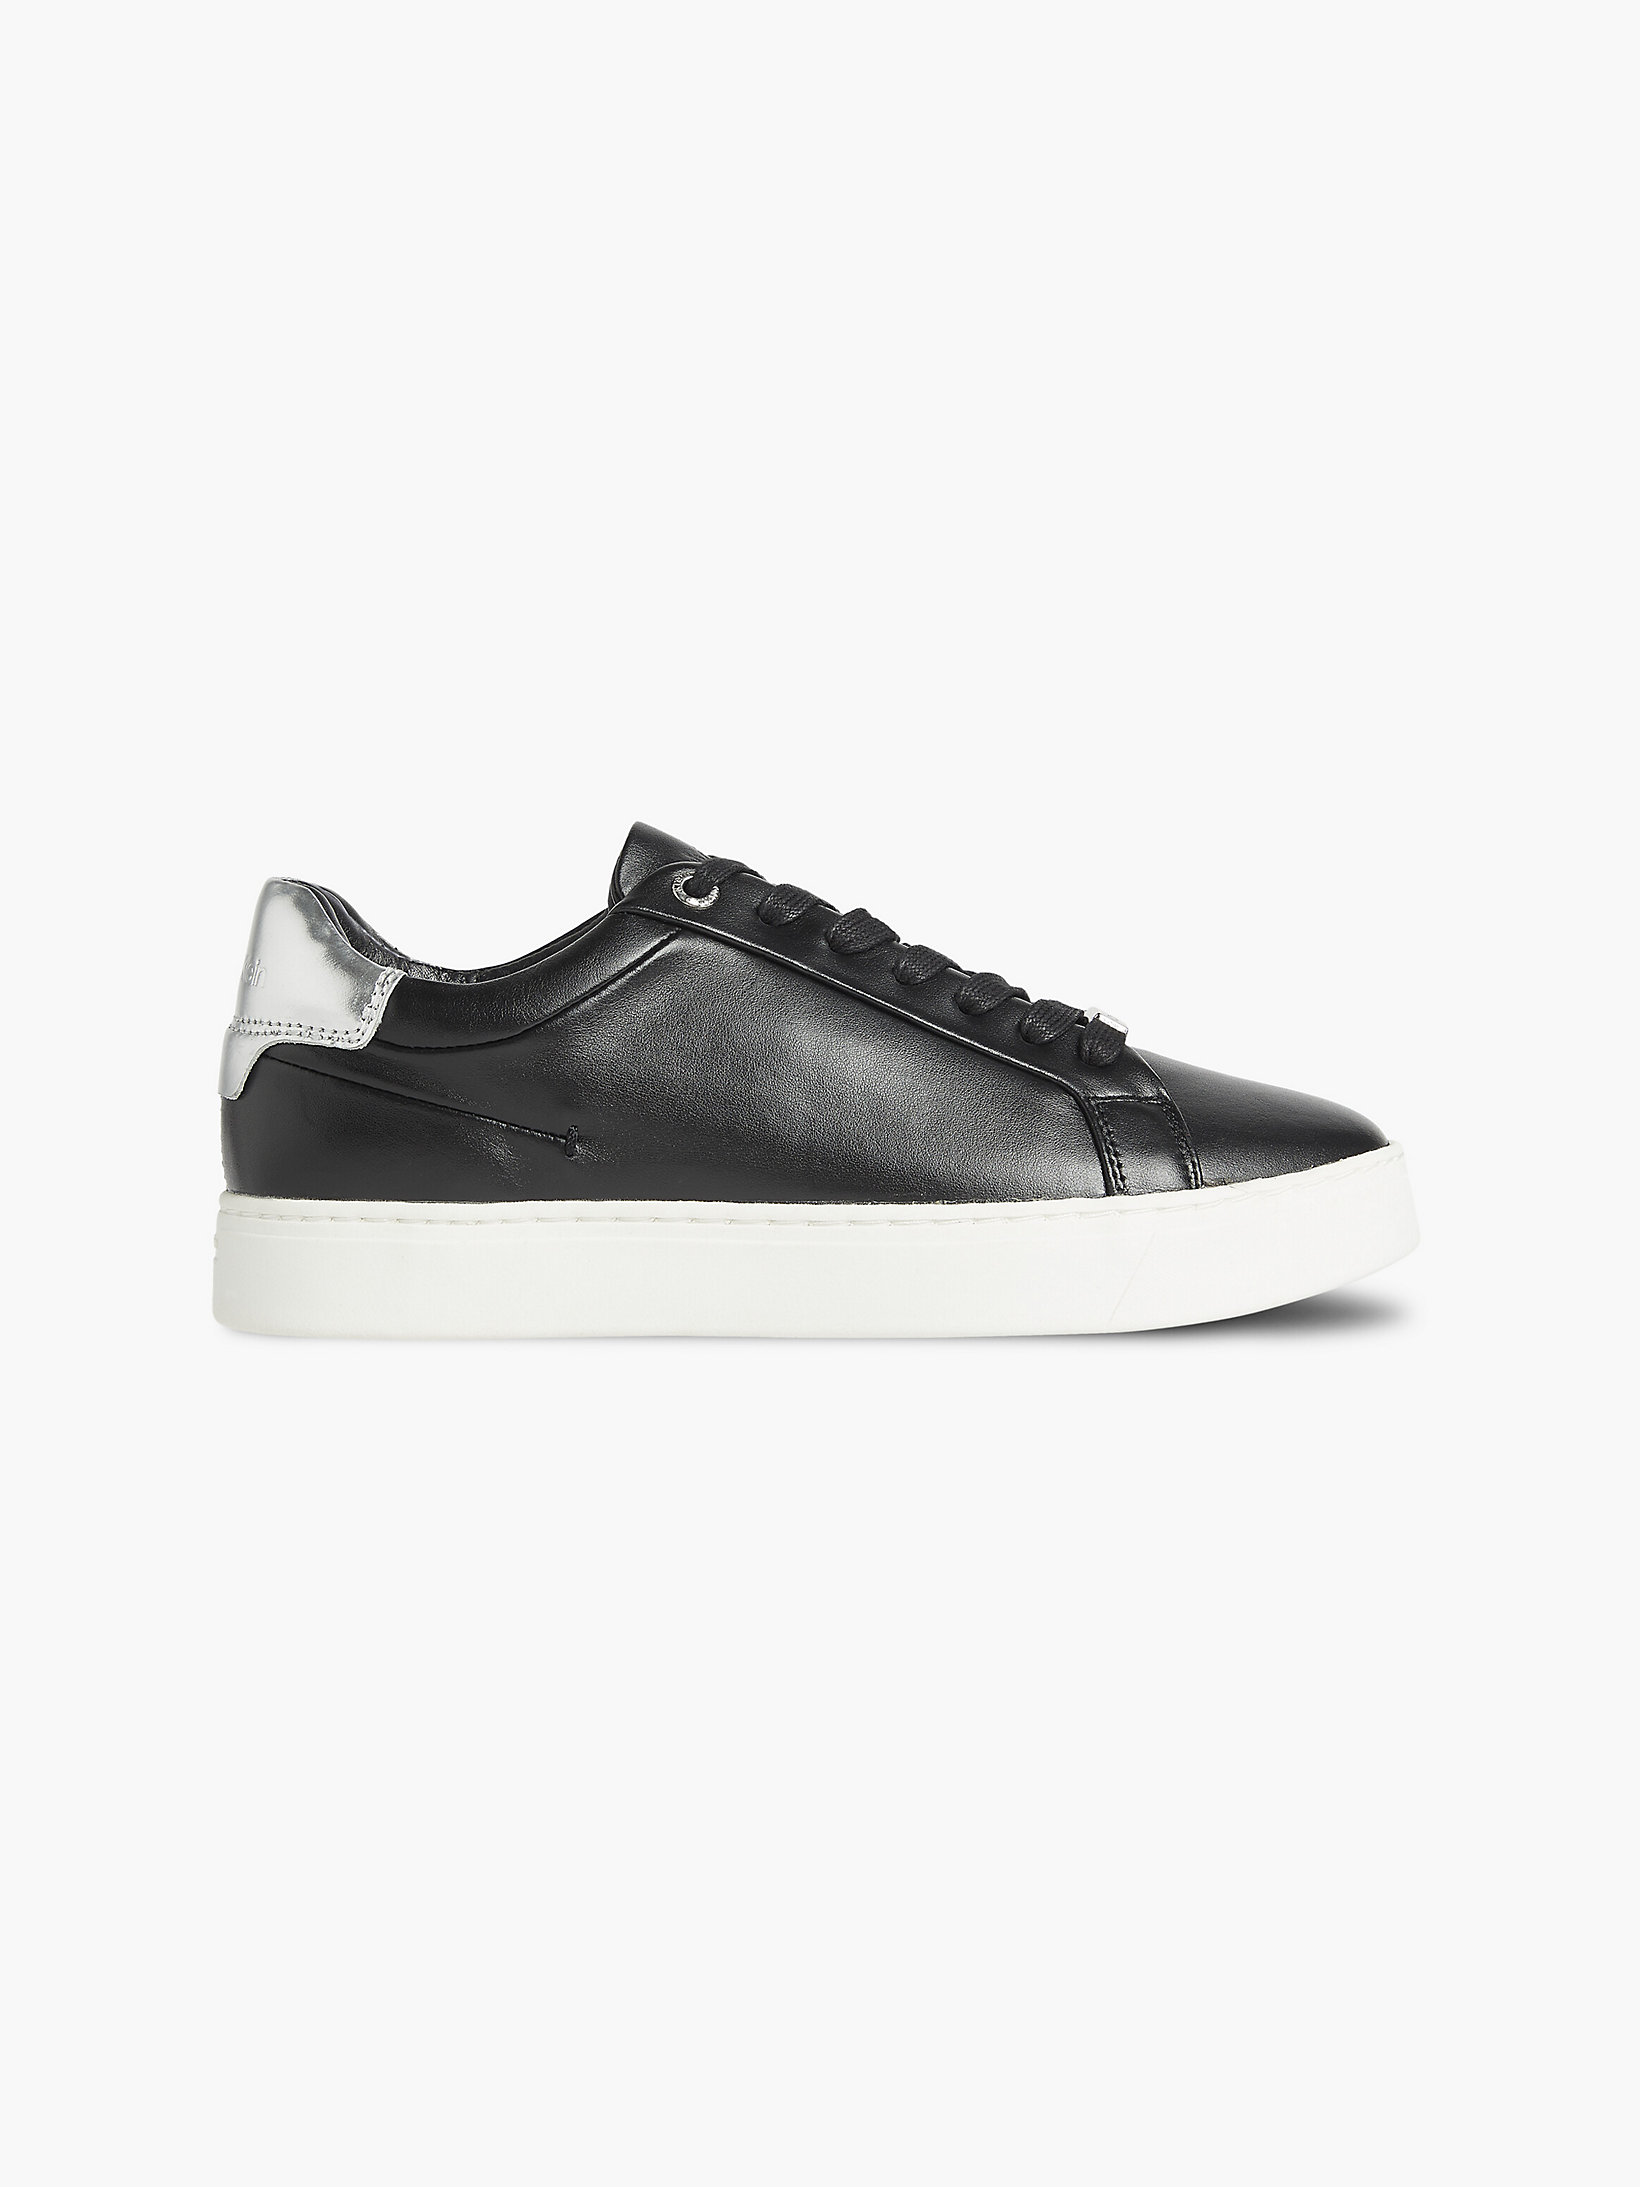 Black / Silver Leather Trainers undefined women Calvin Klein